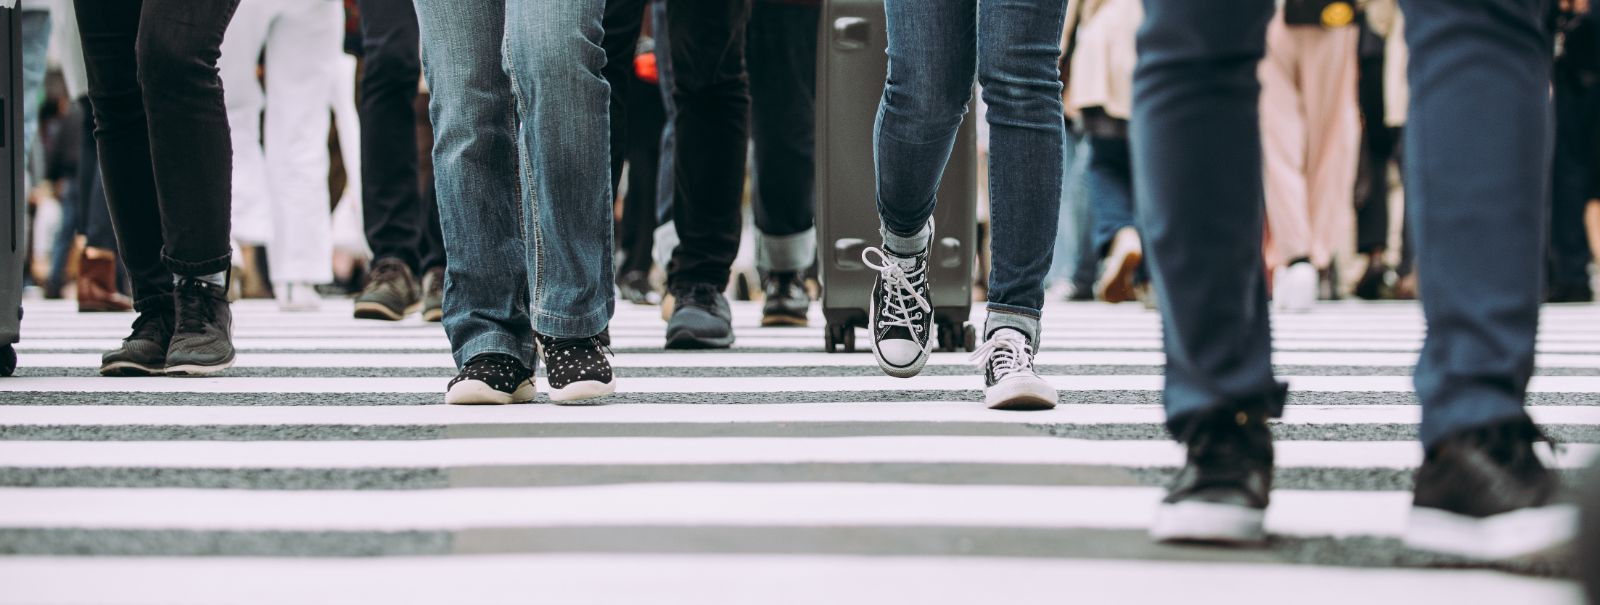 Despite advancements in vehicle safety features and road design, pedestrian fatalities and injuries remain a significant concern worldwide. The complexity of ur